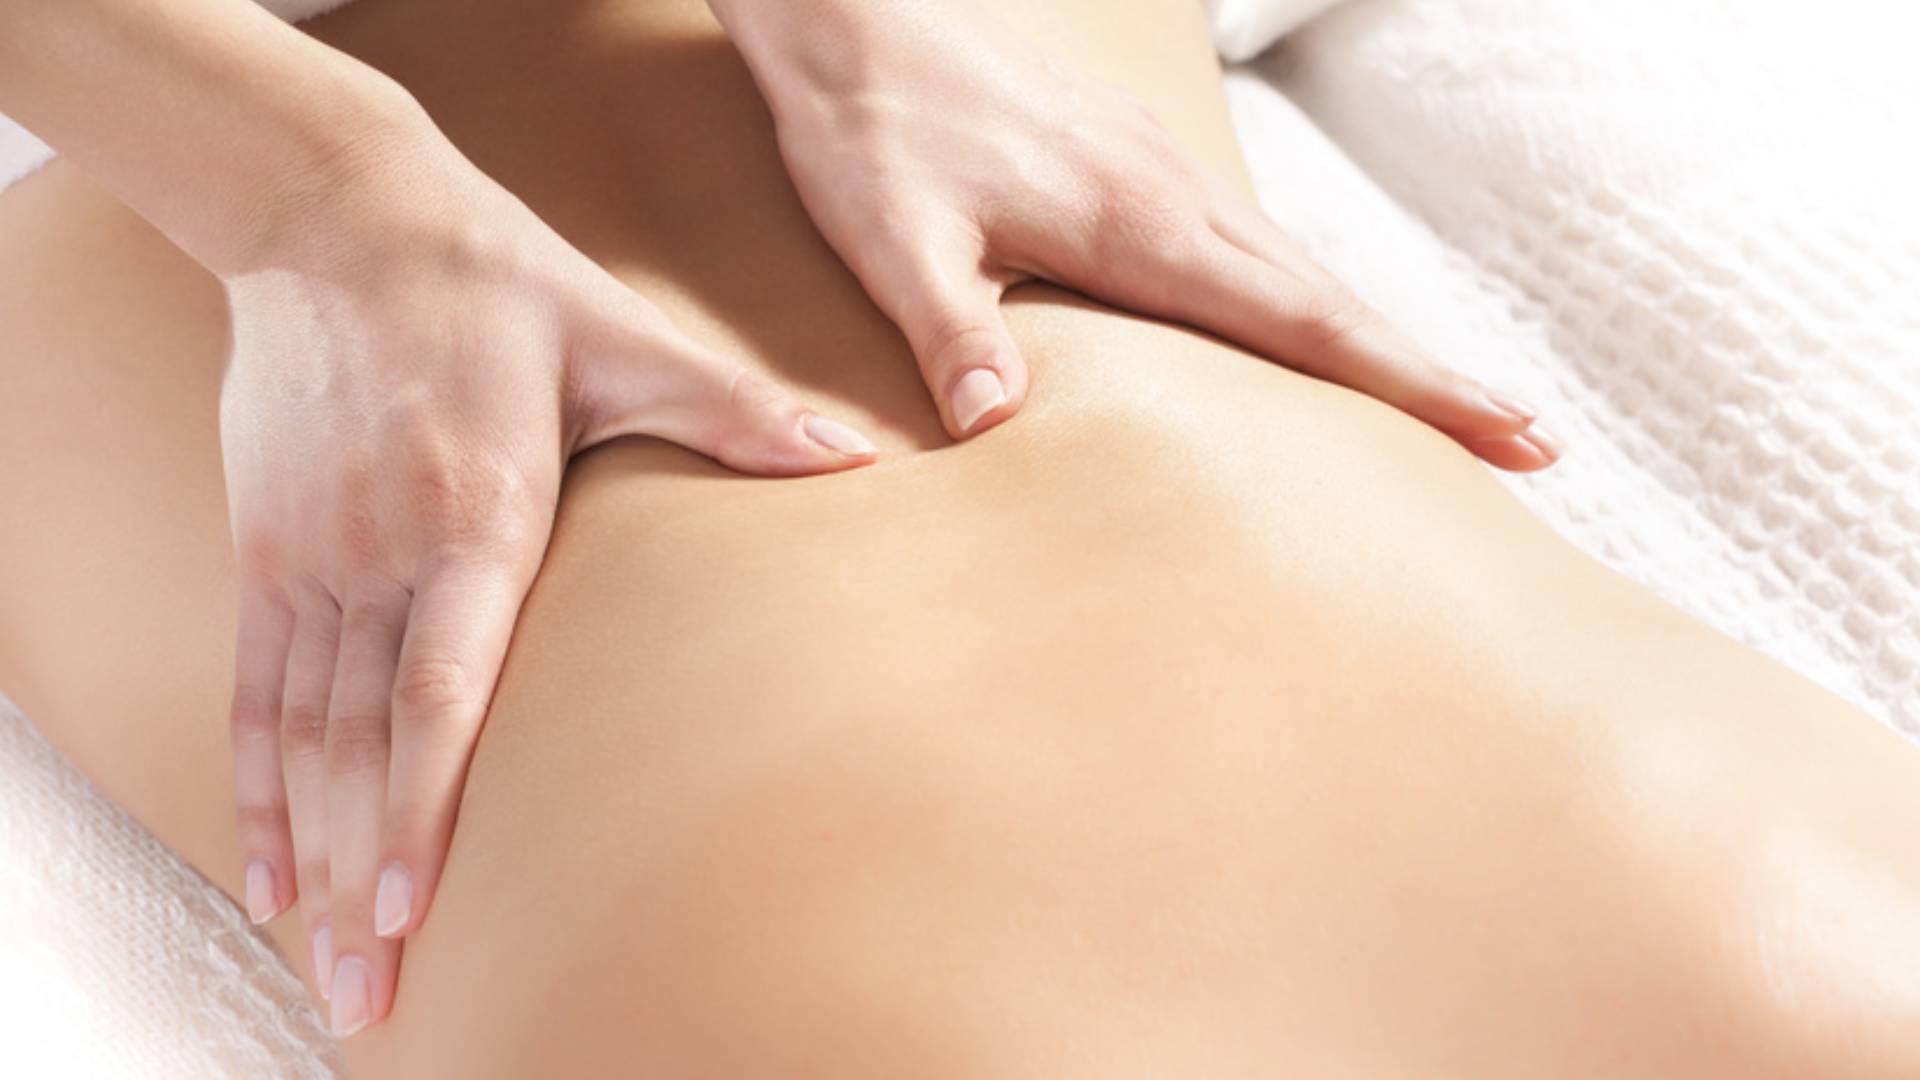 Advanced Lymphatic Treatment: The Latest in Lymphatic Drainage Massage